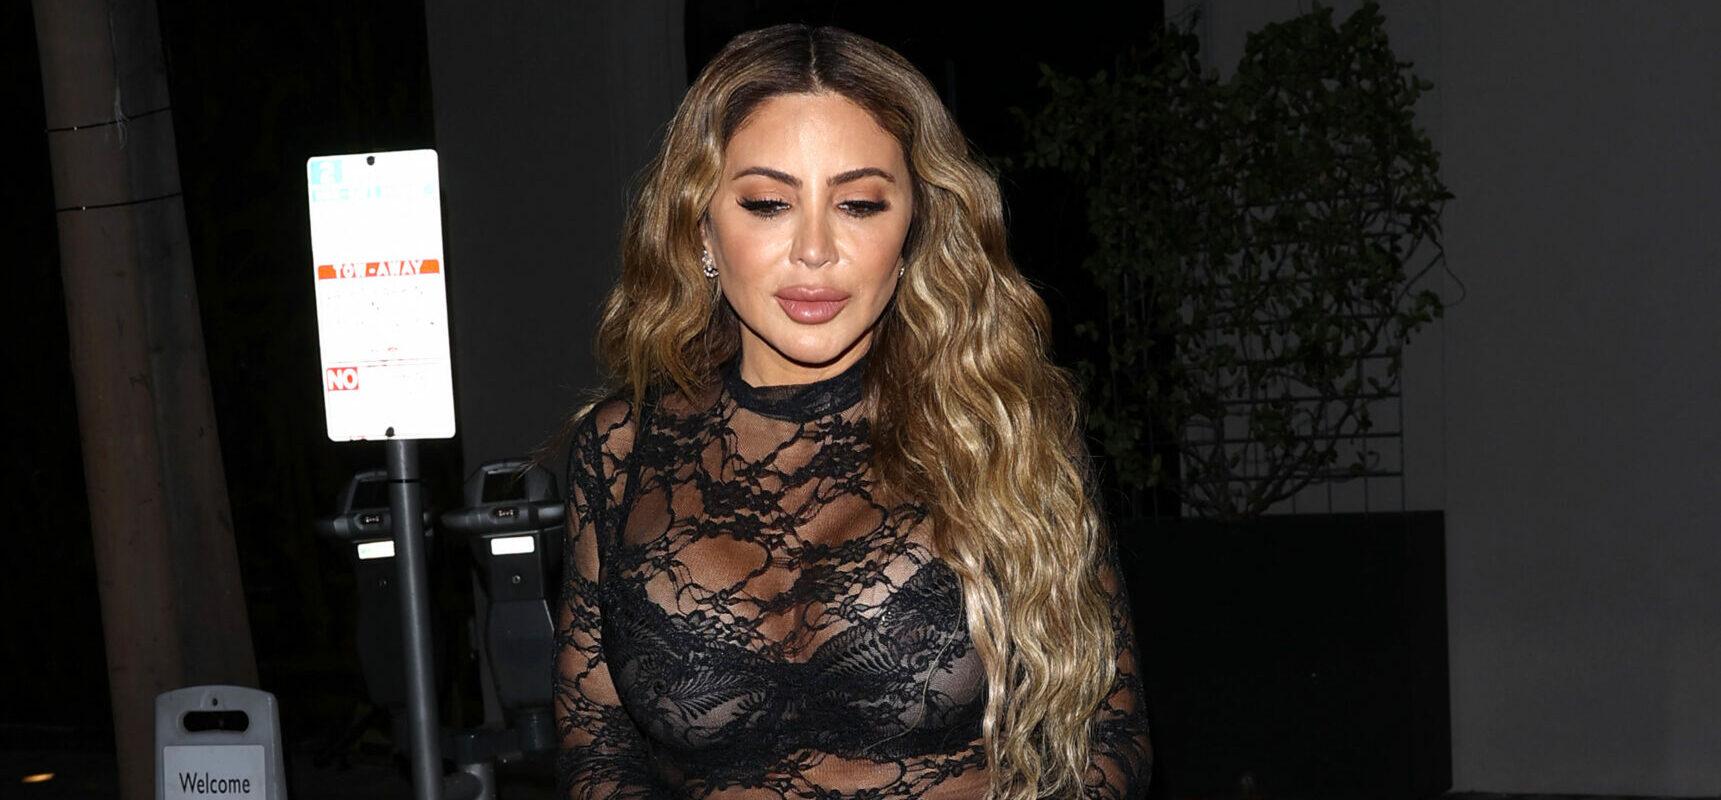 Larsa Pippen Trashed As ‘Basic’ In IG Post Amid Relationship Confession